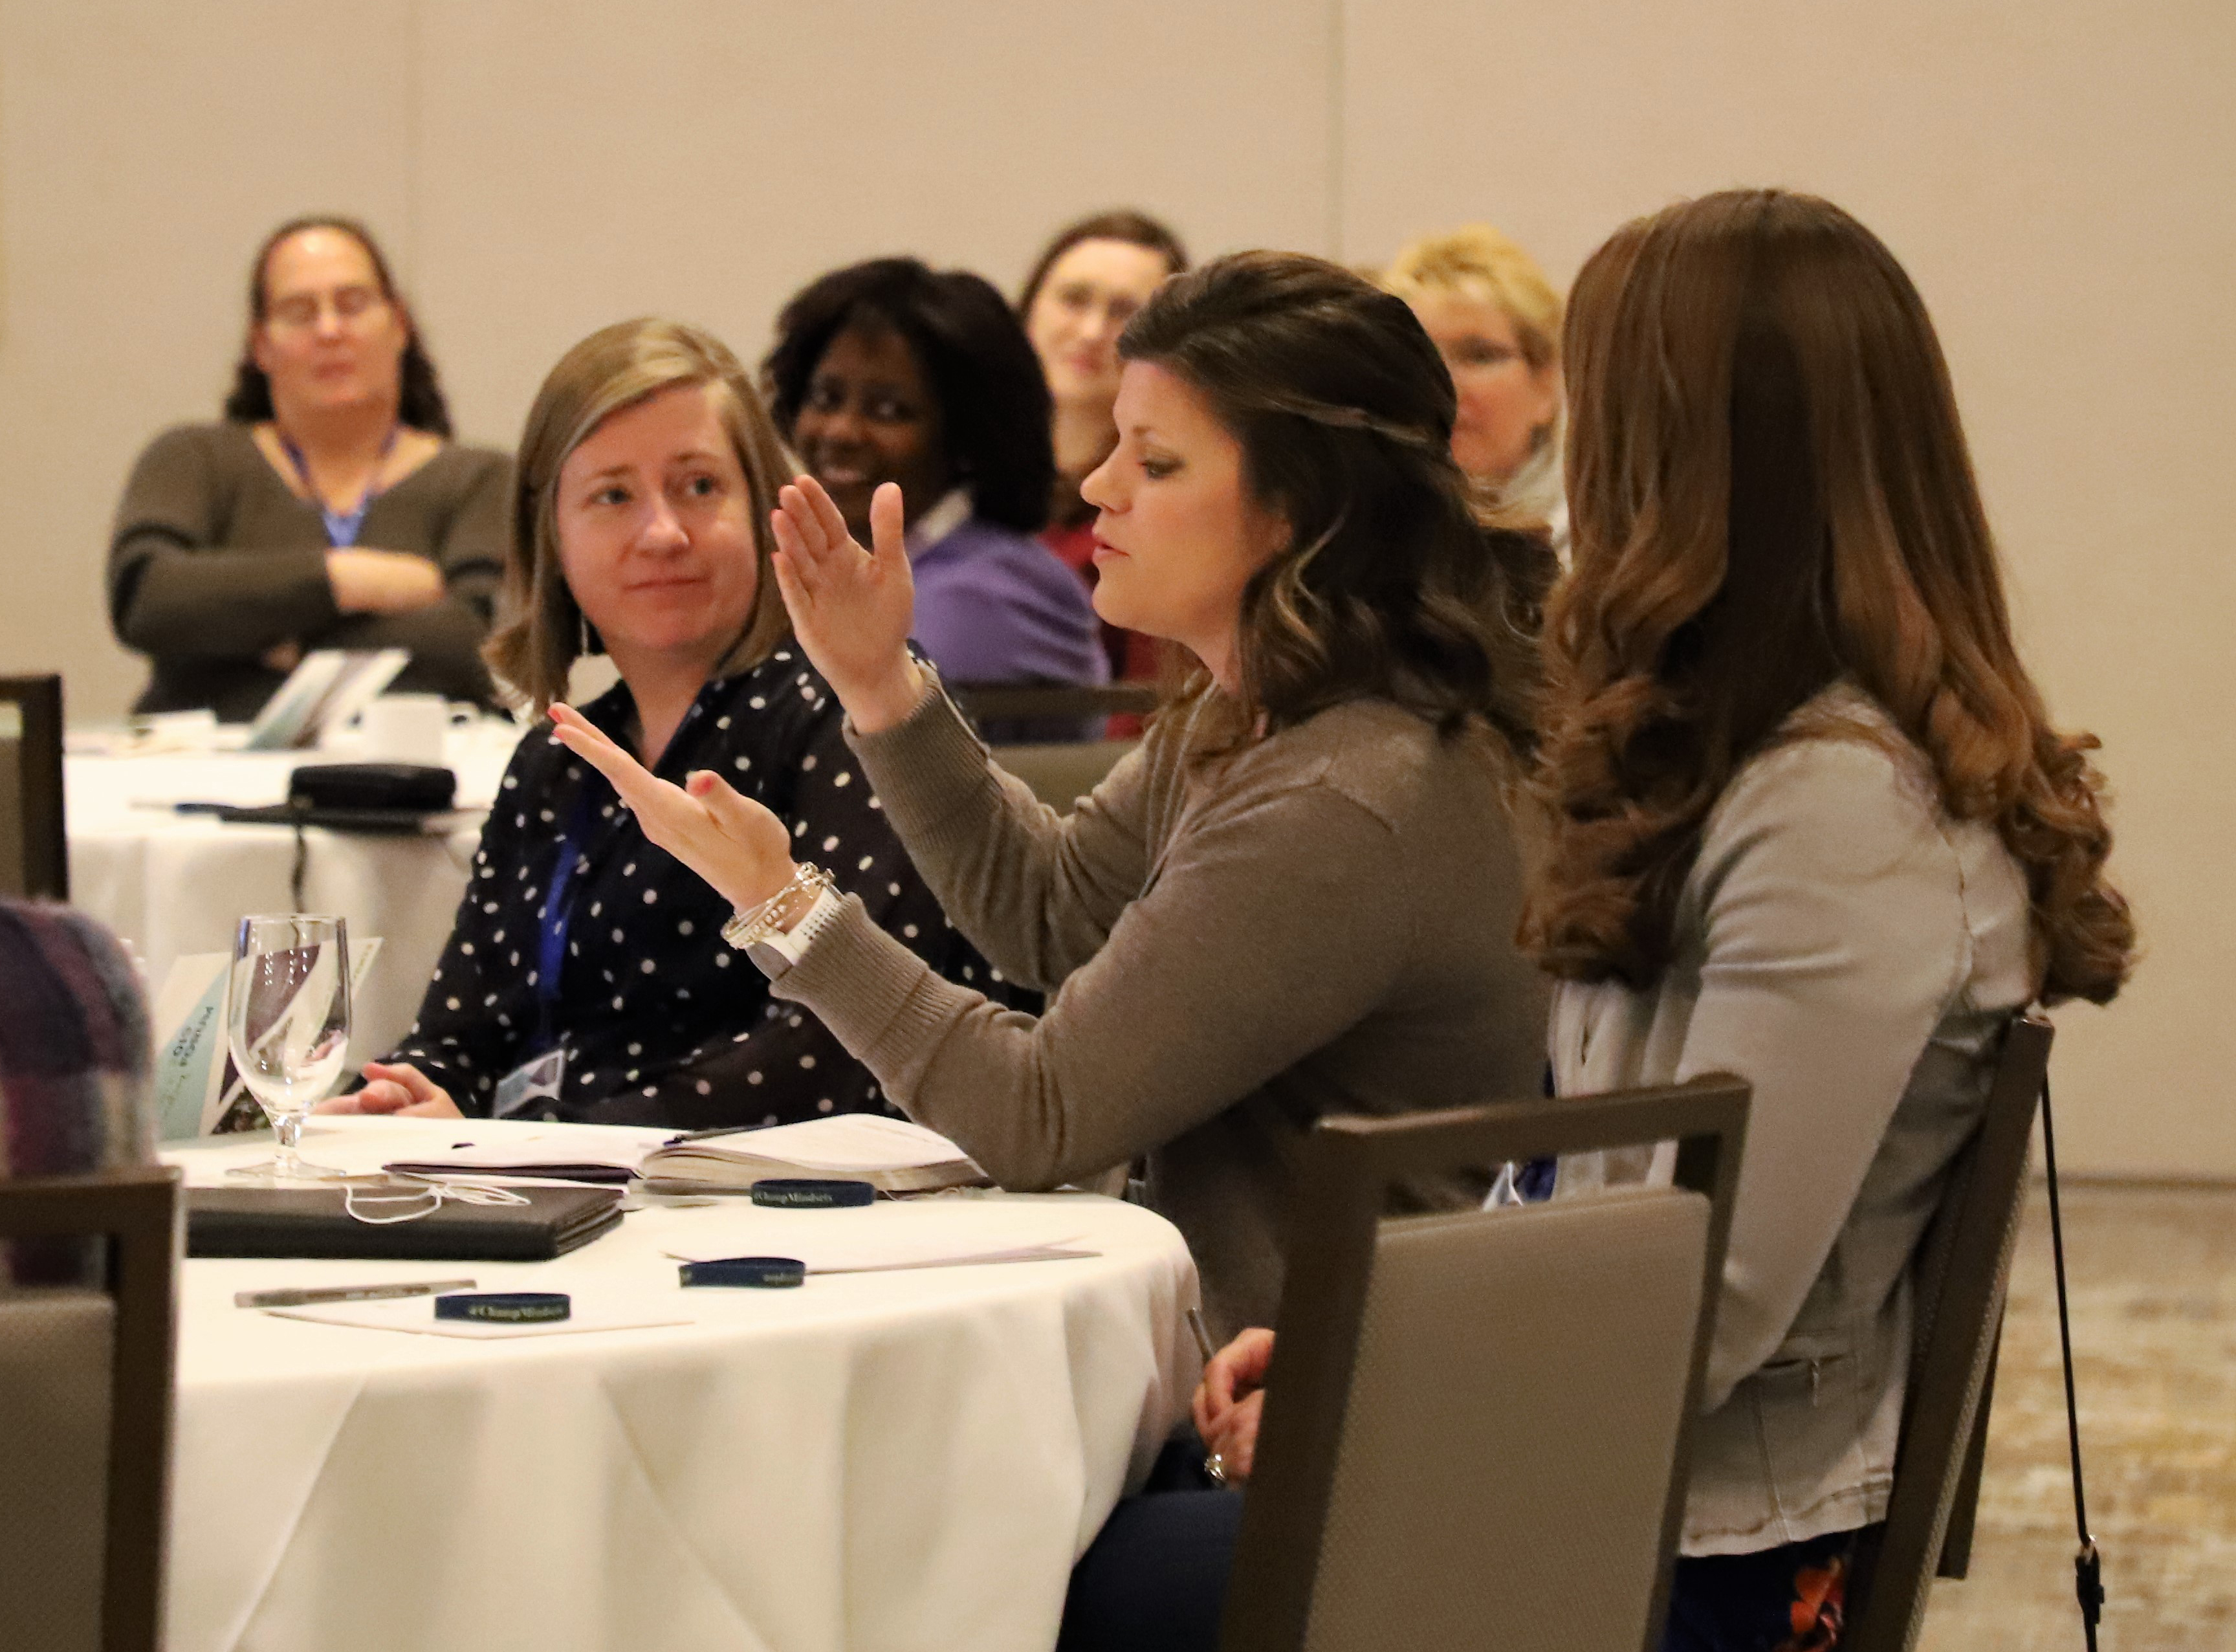 The Women in Finishing forum provides two days of professional development for women in the industry.